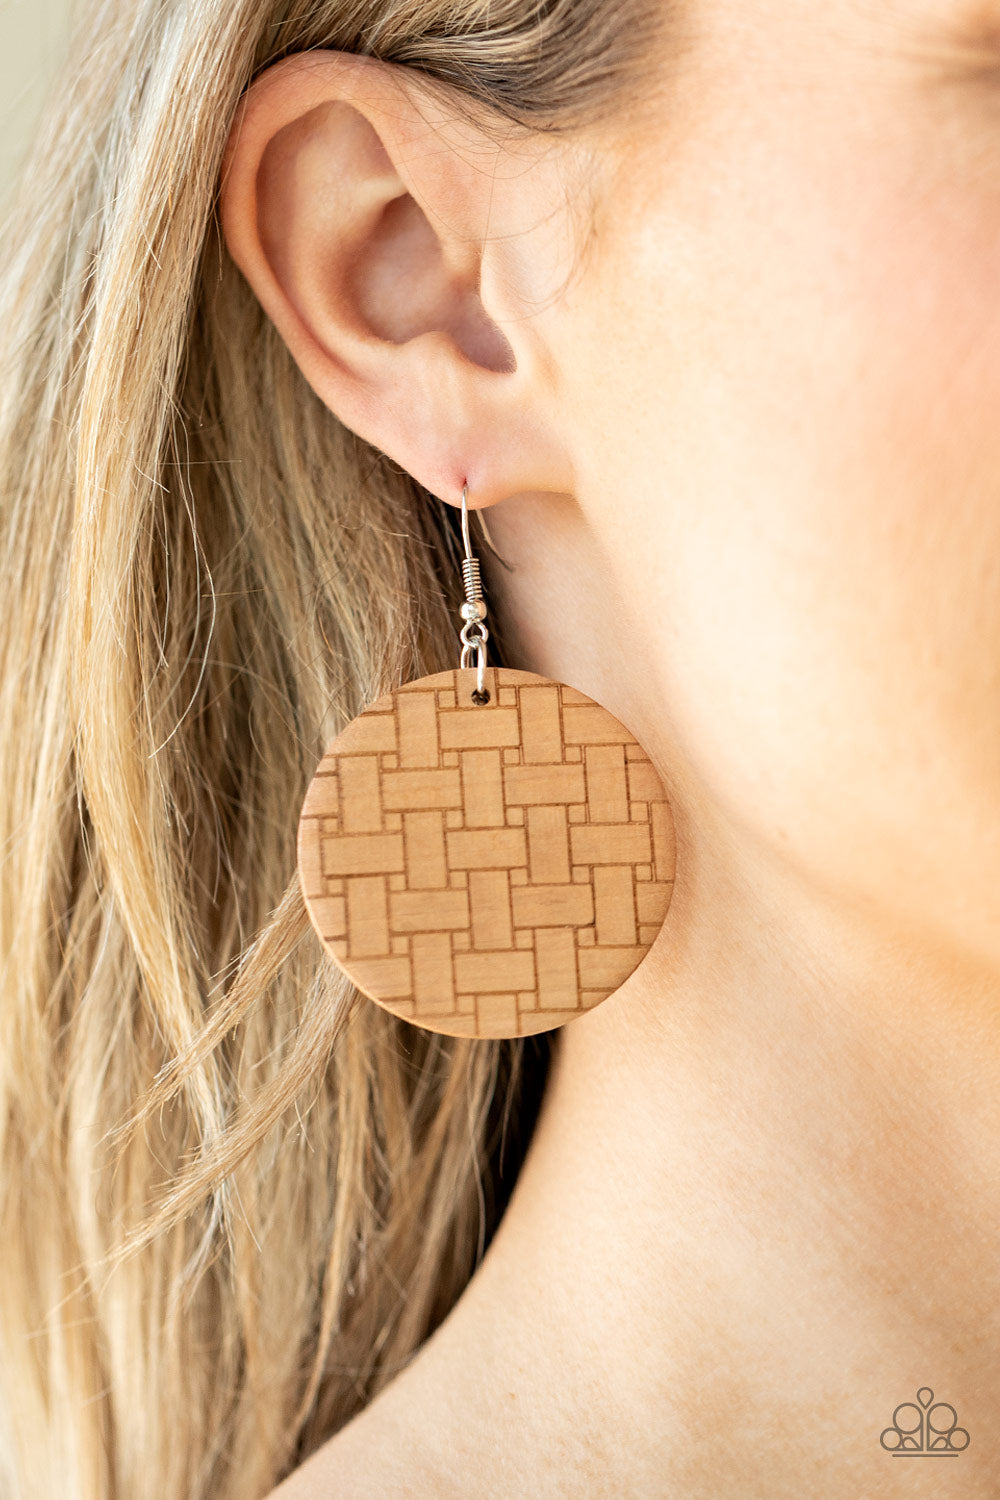 Paparazzi Jewelry & Accessories - Natural Novelty - Brown Earrings. Bling By Titia Boutique